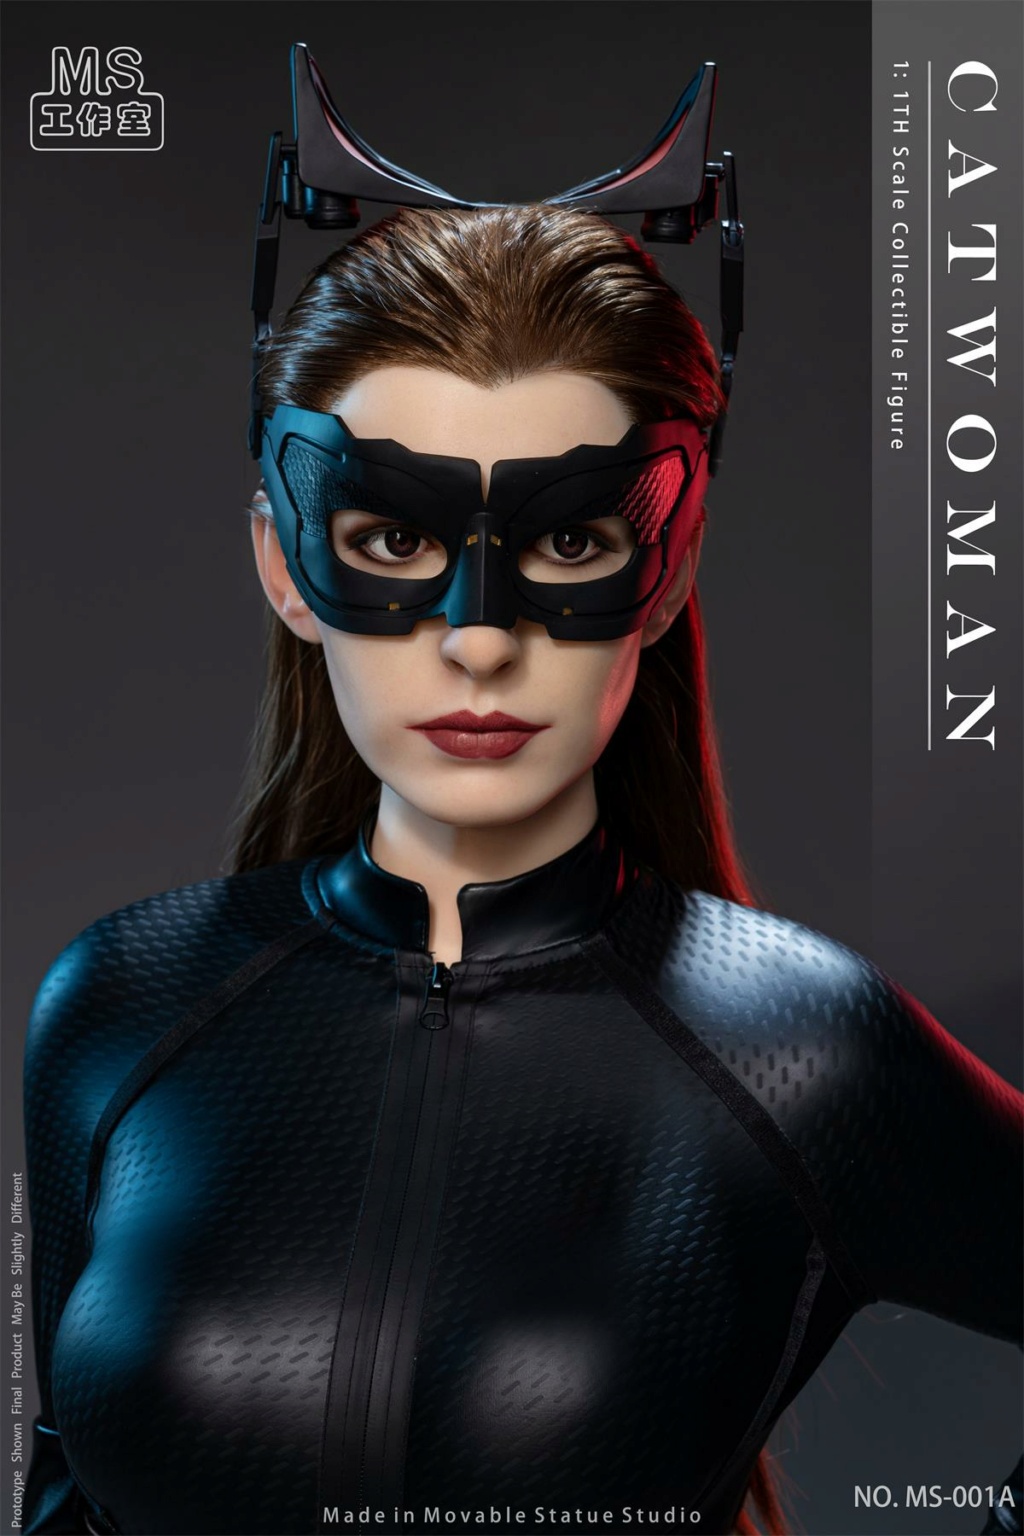 Newproduct - NEW PRODUCT: MS Studio: Catwoman Movie Version 1/1 Proportion Catwoman Cherished Movable Figure “ Grand ” Age MS-001A 2182